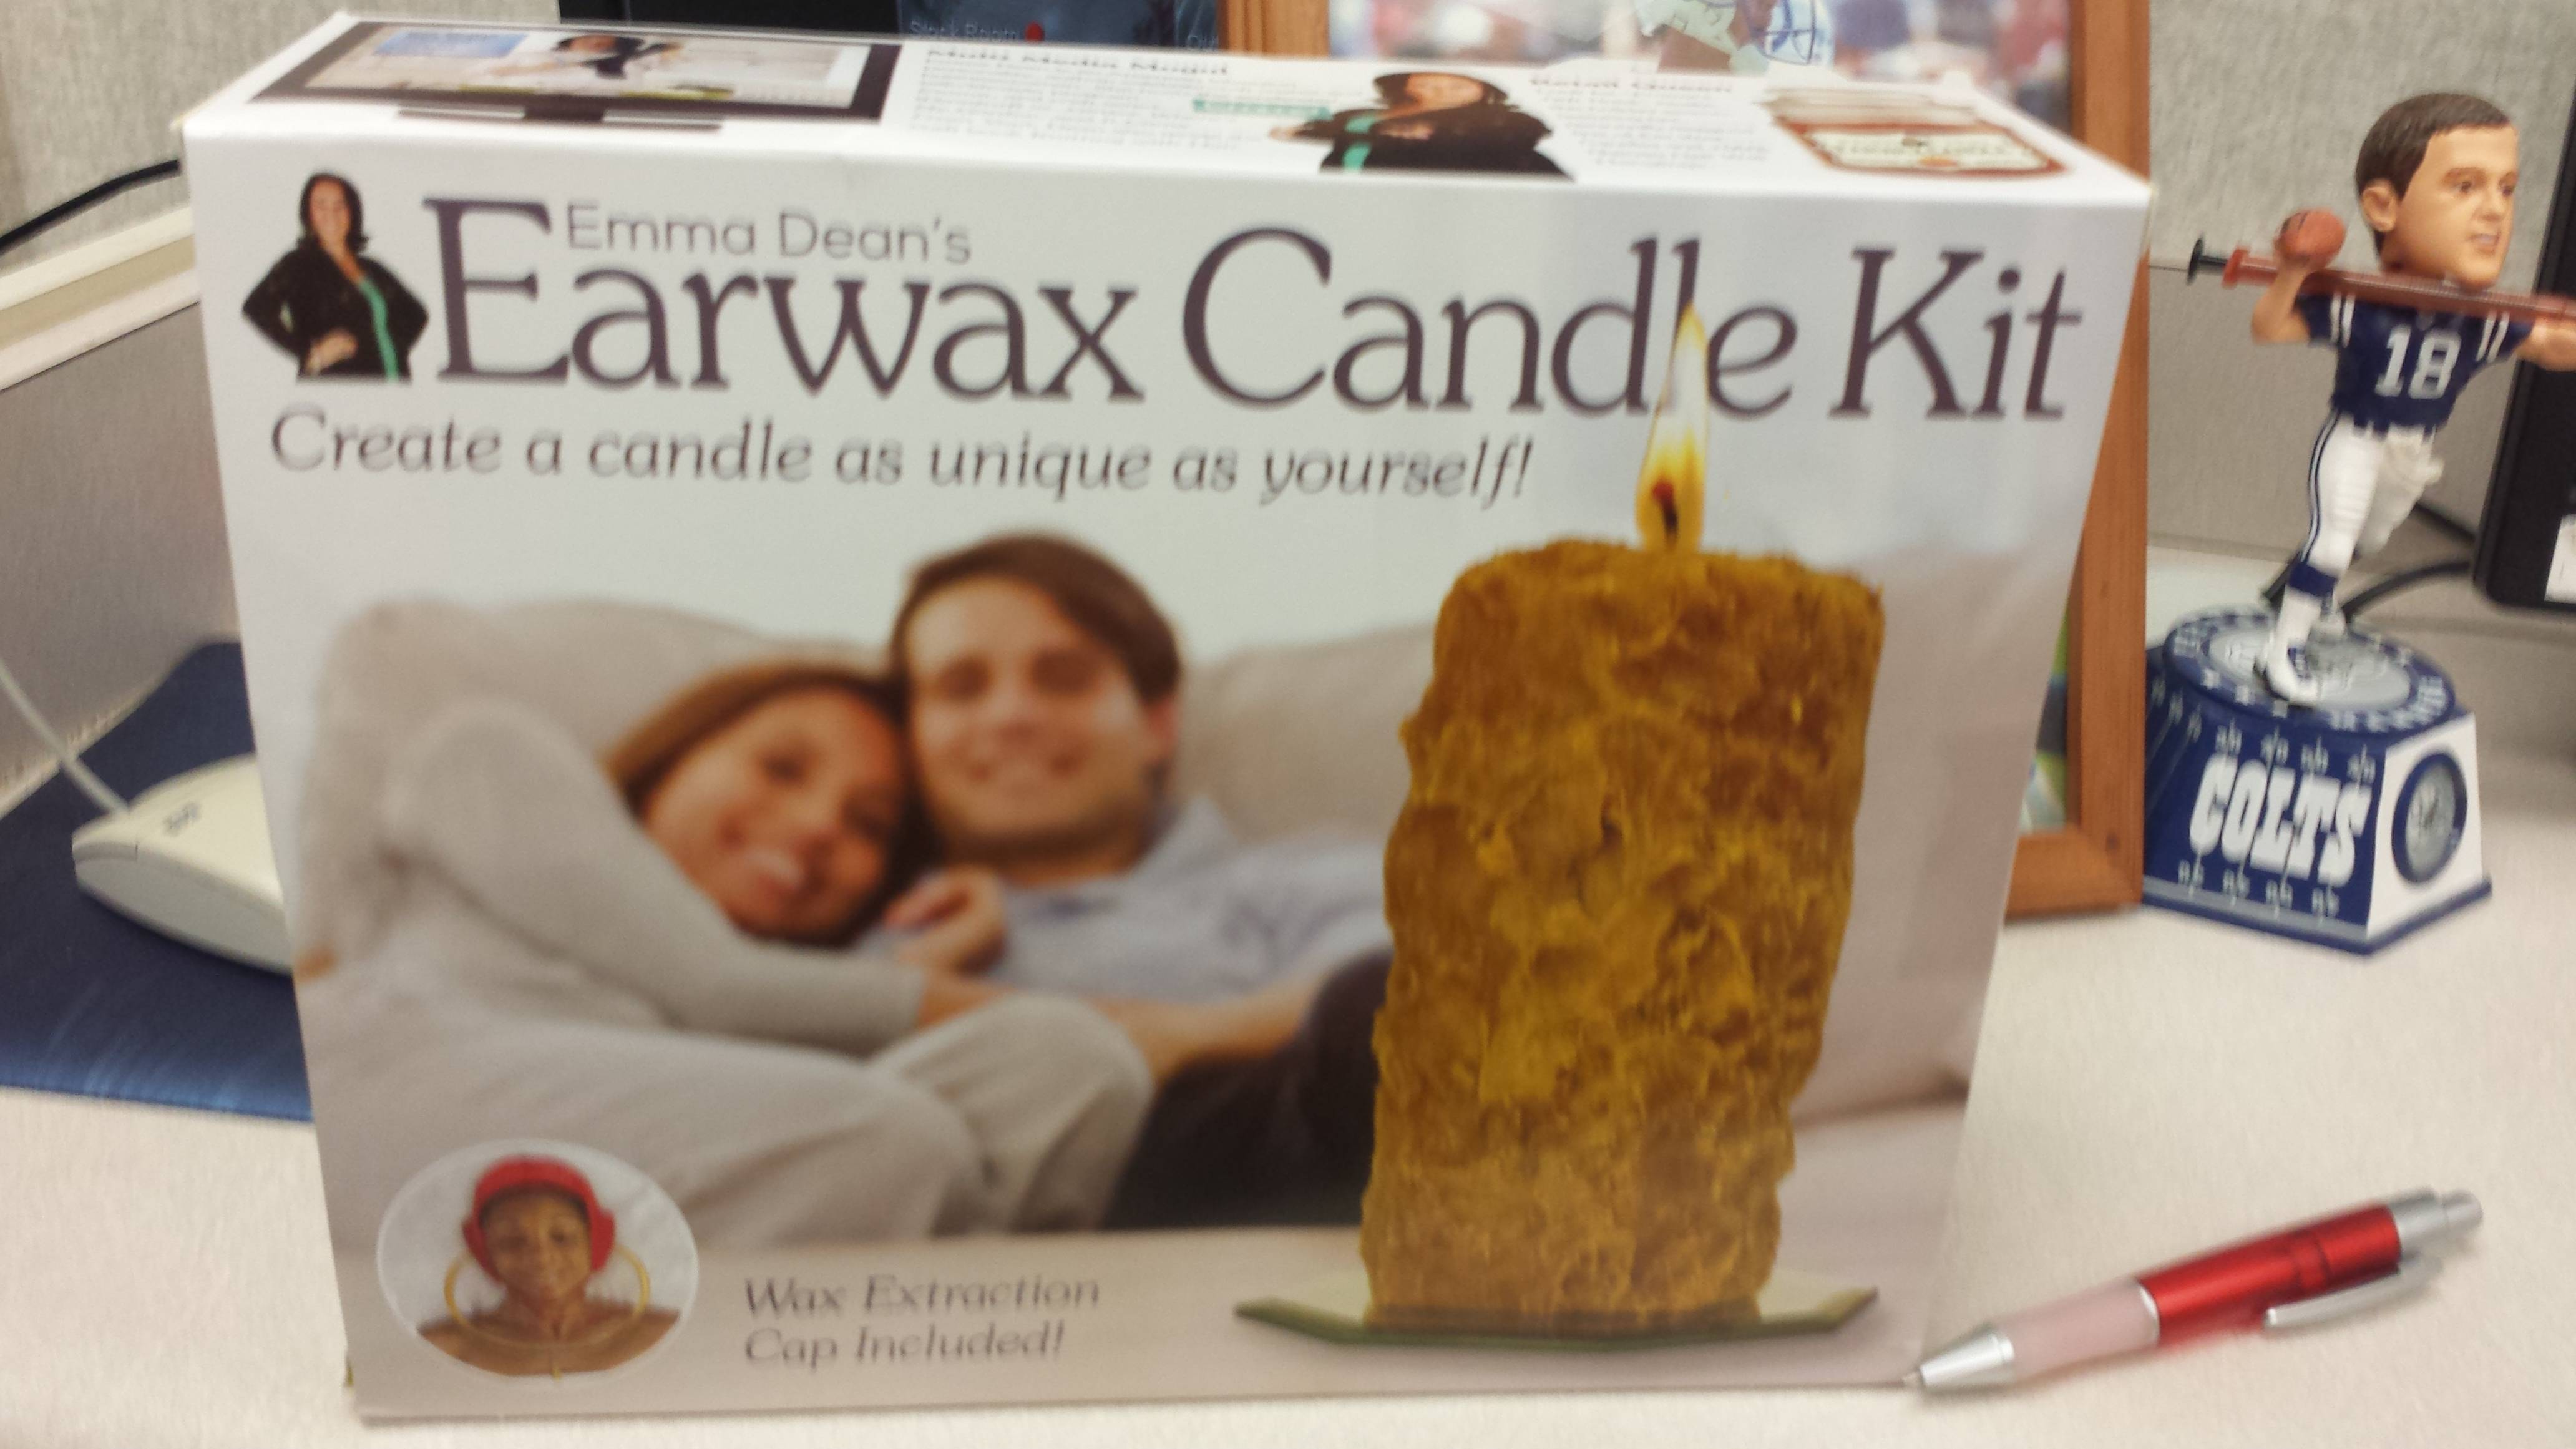 wtf ear wax smells sweet - Earwax Candle Kit Create a candle as unique as yourself! Wix From